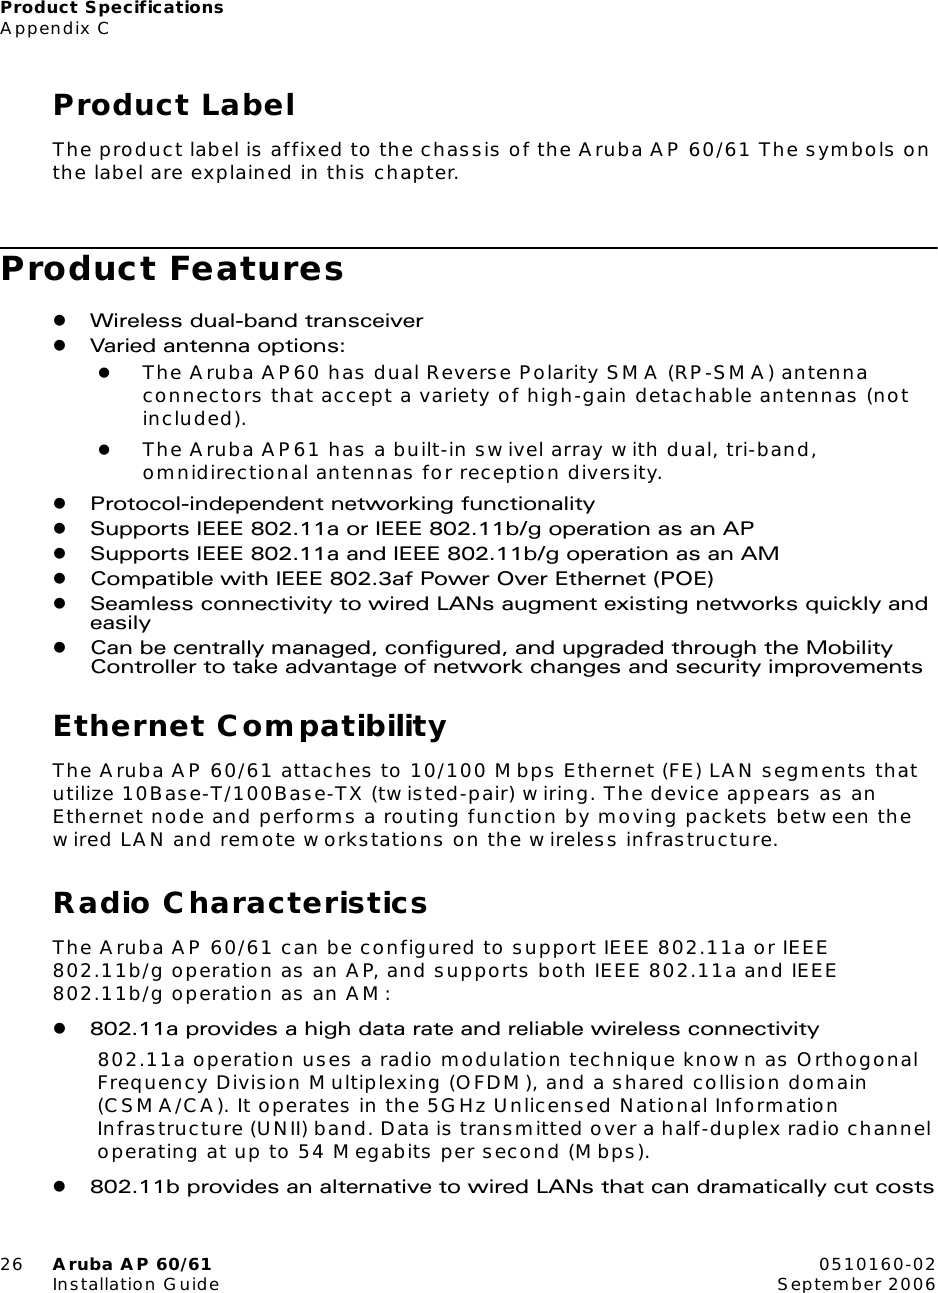 Product SpecificationsAppendix C26 Aruba AP 60/61 0510160-02Installation Guide September 2006Product LabelThe product label is affixed to the chassis of the Aruba AP 60/61 The symbols on the label are explained in this chapter.Product FeatureszWireless dual-band transceiverzVaried antenna options:zThe Aruba AP60 has dual Reverse Polarity SMA (RP-SMA) antenna connectors that accept a variety of high-gain detachable antennas (not included).zThe Aruba AP61 has a built-in swivel array with dual, tri-band, omnidirectional antennas for reception diversity.zProtocol-independent networking functionalityzSupports IEEE 802.11a or IEEE 802.11b/g operation as an APzSupports IEEE 802.11a and IEEE 802.11b/g operation as an AMzCompatible with IEEE 802.3af Power Over Ethernet (POE)zSeamless connectivity to wired LANs augment existing networks quickly and easilyzCan be centrally managed, configured, and upgraded through the Mobility Controller to take advantage of network changes and security improvementsEthernet CompatibilityThe Aruba AP 60/61 attaches to 10/100 Mbps Ethernet (FE) LAN segments that utilize 10Base-T/100Base-TX (twisted-pair) wiring. The device appears as an Ethernet node and performs a routing function by moving packets between the wired LAN and remote workstations on the wireless infrastructure.Radio CharacteristicsThe Aruba AP 60/61 can be configured to support IEEE 802.11a or IEEE 802.11b/g operation as an AP, and supports both IEEE 802.11a and IEEE 802.11b/g operation as an AM:z802.11a provides a high data rate and reliable wireless connectivity802.11a operation uses a radio modulation technique known as Orthogonal Frequency Division Multiplexing (OFDM), and a shared collision domain (CSMA/CA). It operates in the 5GHz Unlicensed National Information Infrastructure (UNII) band. Data is transmitted over a half-duplex radio channel operating at up to 54 Megabits per second (Mbps).z802.11b provides an alternative to wired LANs that can dramatically cut costs